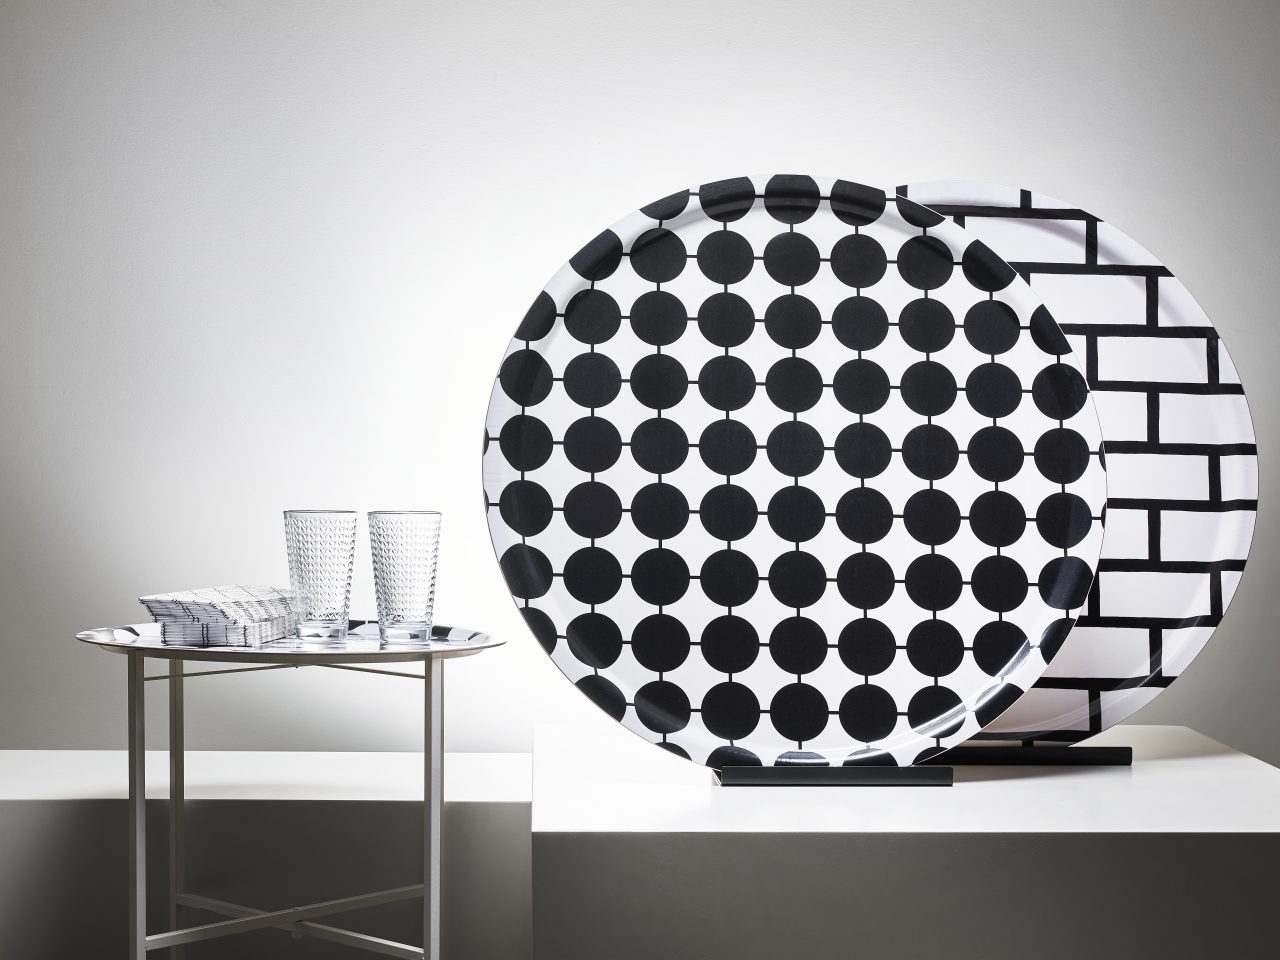 Two glasses, a stack of paper napkins on a small tray table next to two large round trays with black/white graphic patterns.